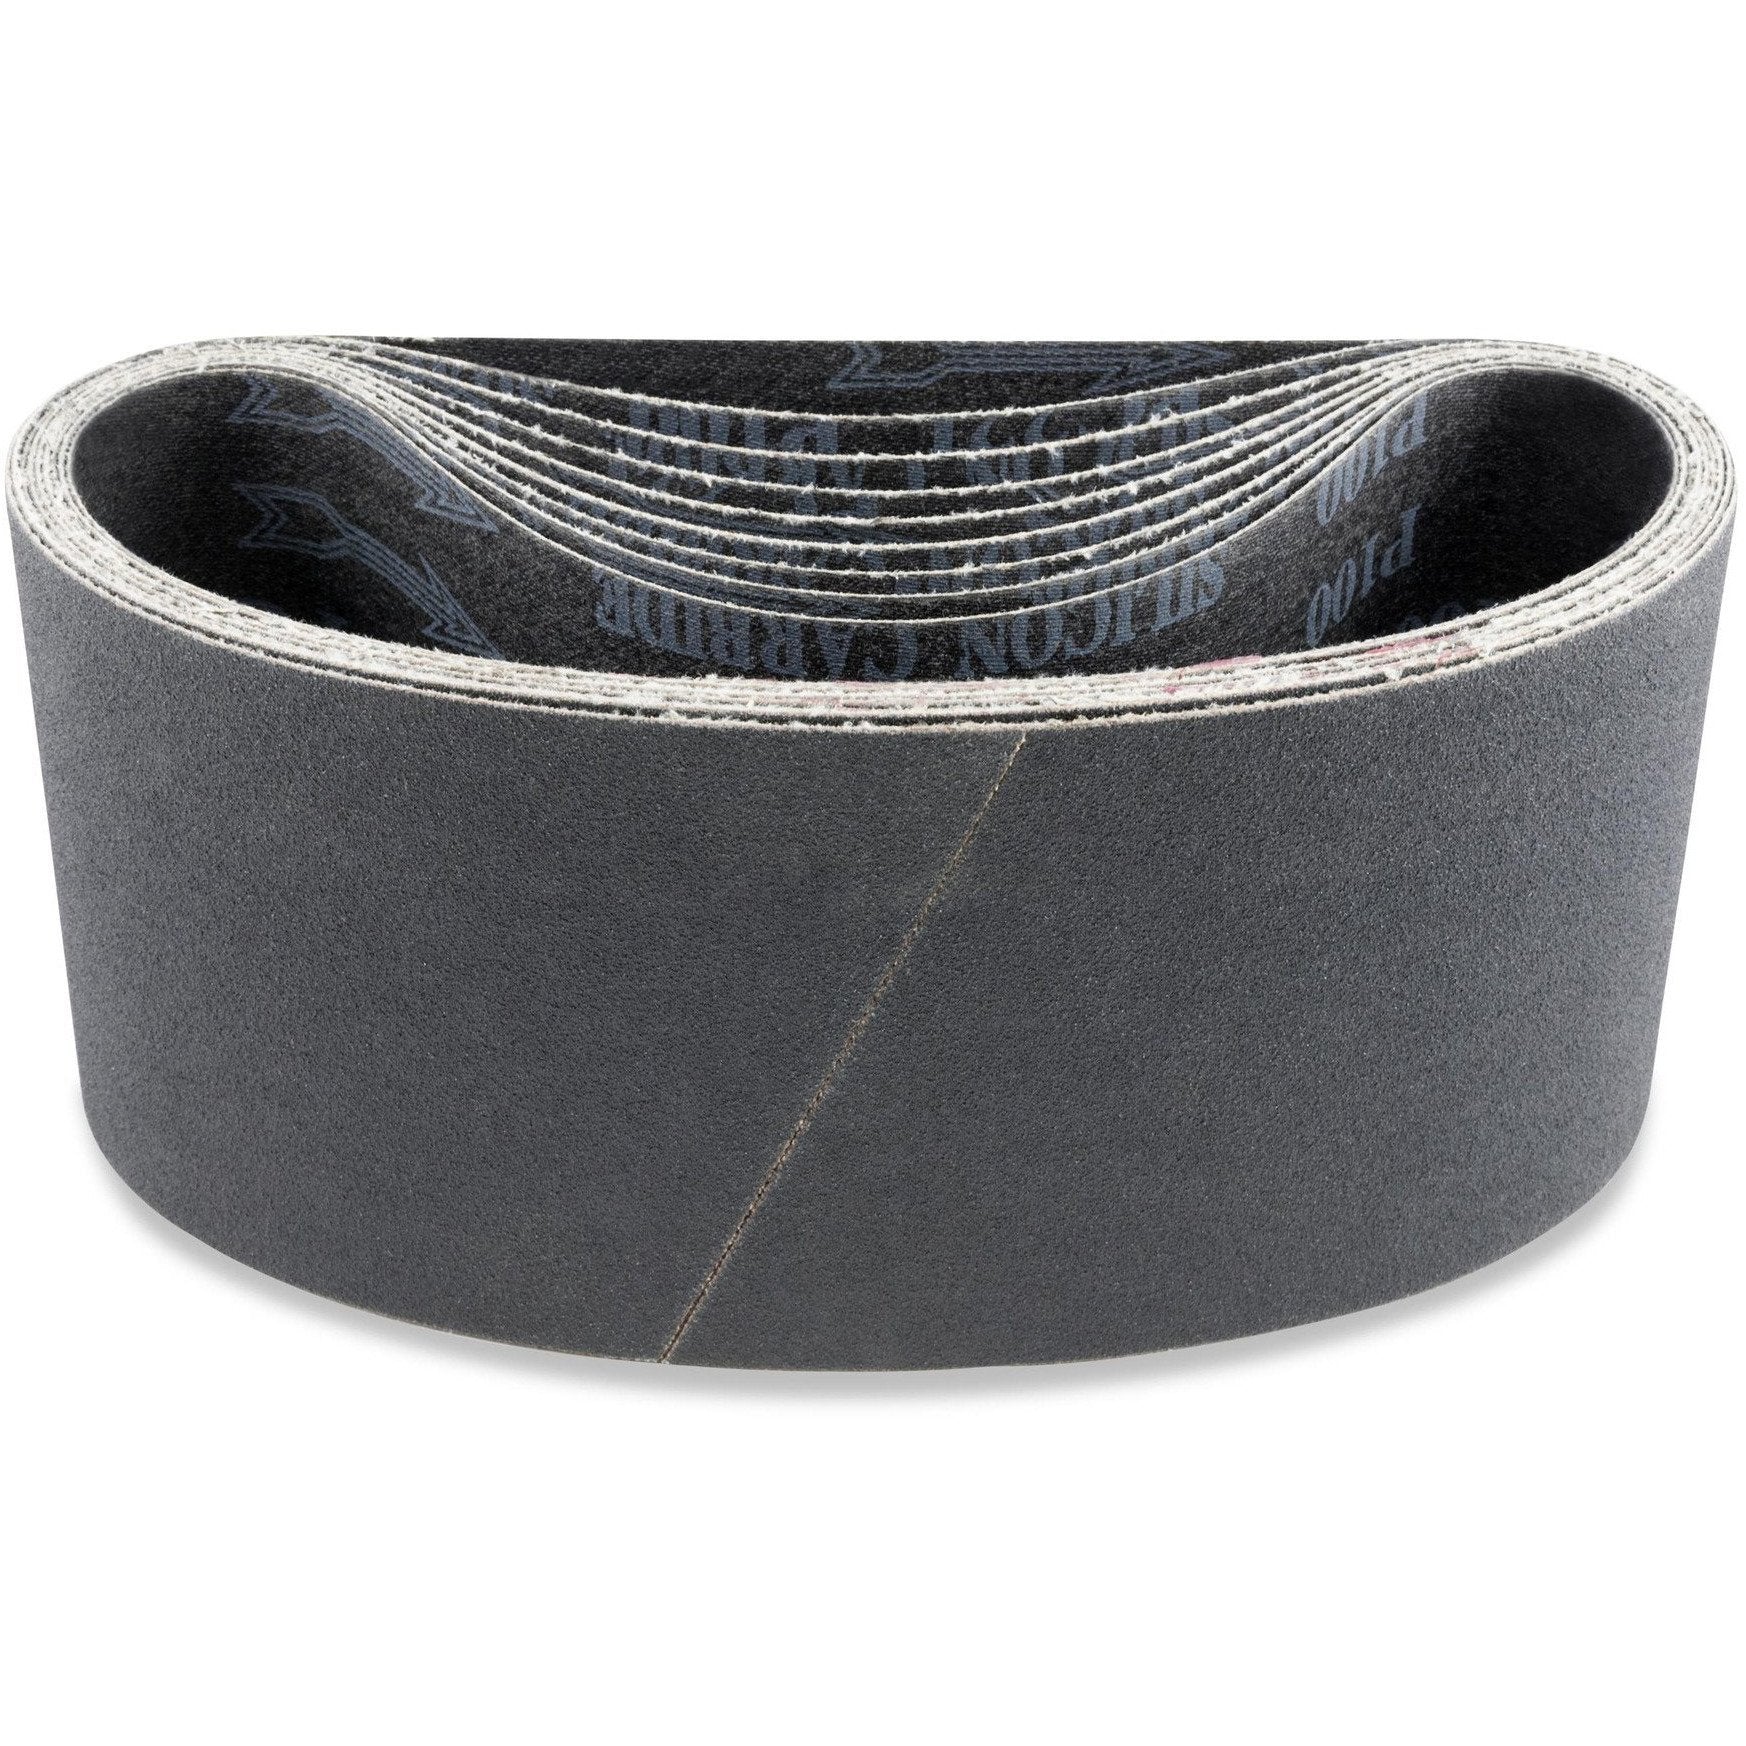 3 1/2 X 15 1/2 Inch Industrial Grade Silicon Carbide Sanding Belts, 4 Pack - Red Label Abrasives